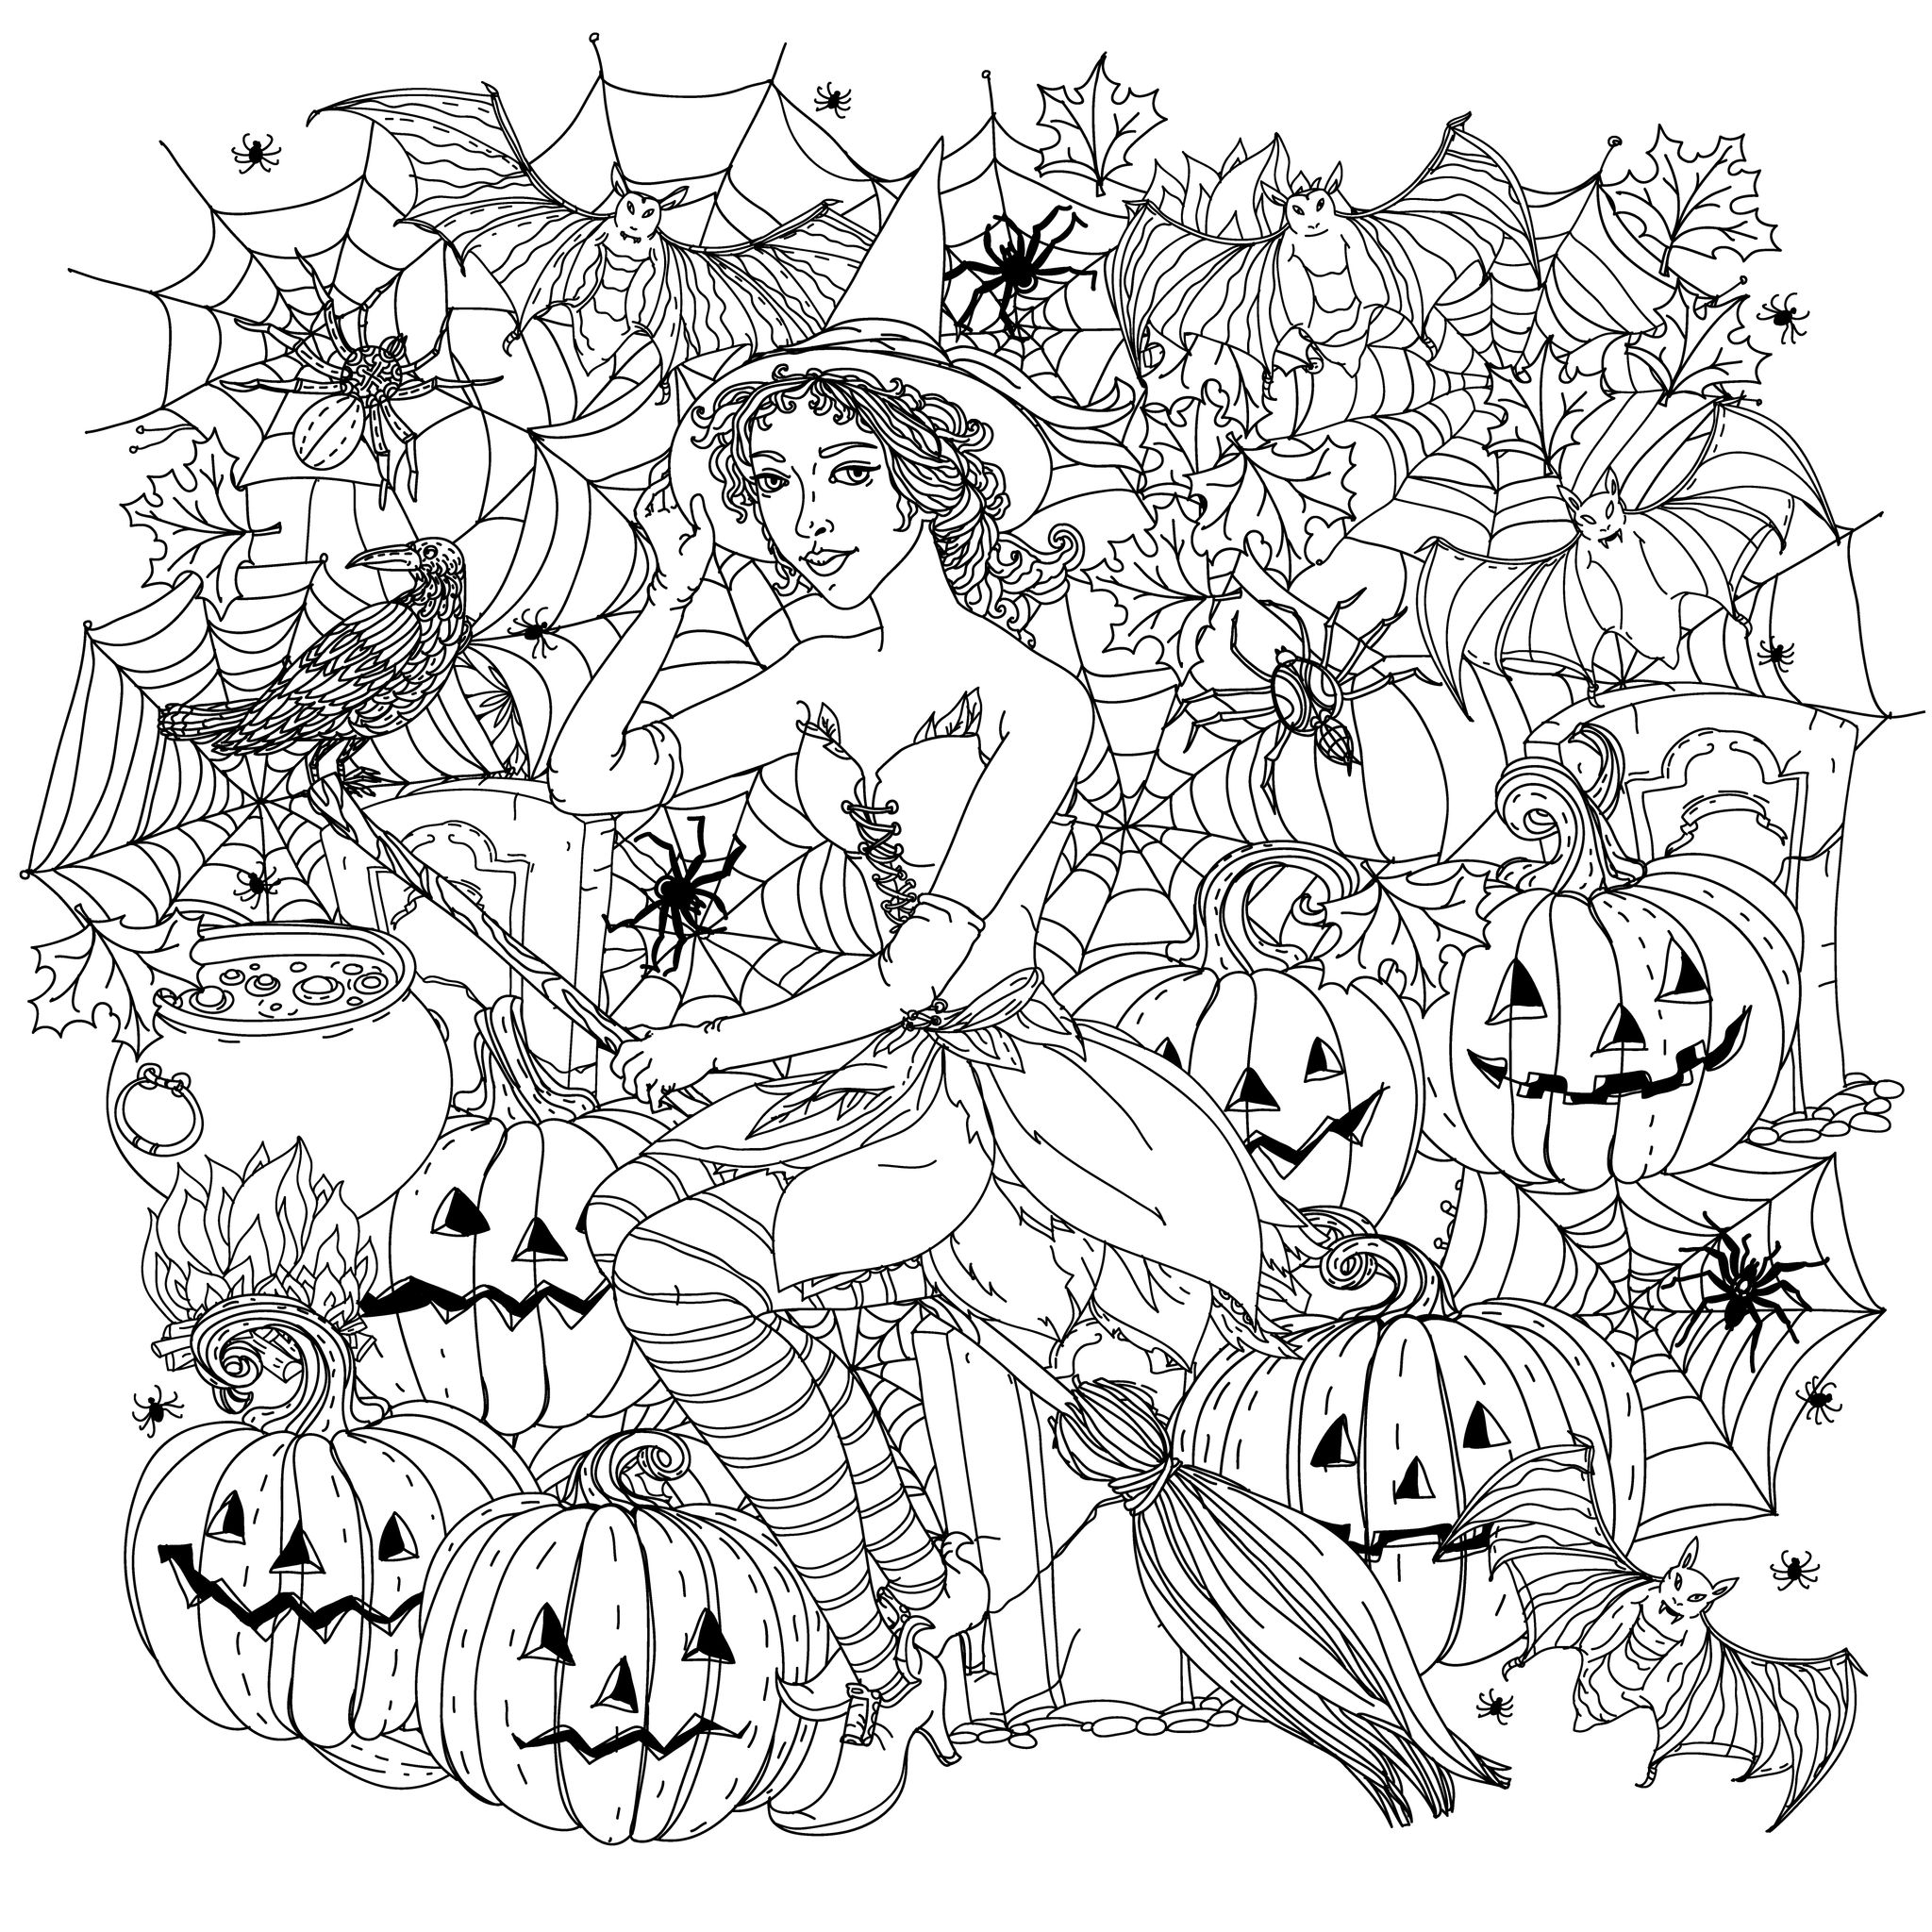 Halloween witch with pumpkins by mashabr - Halloween Adult Coloring Pages